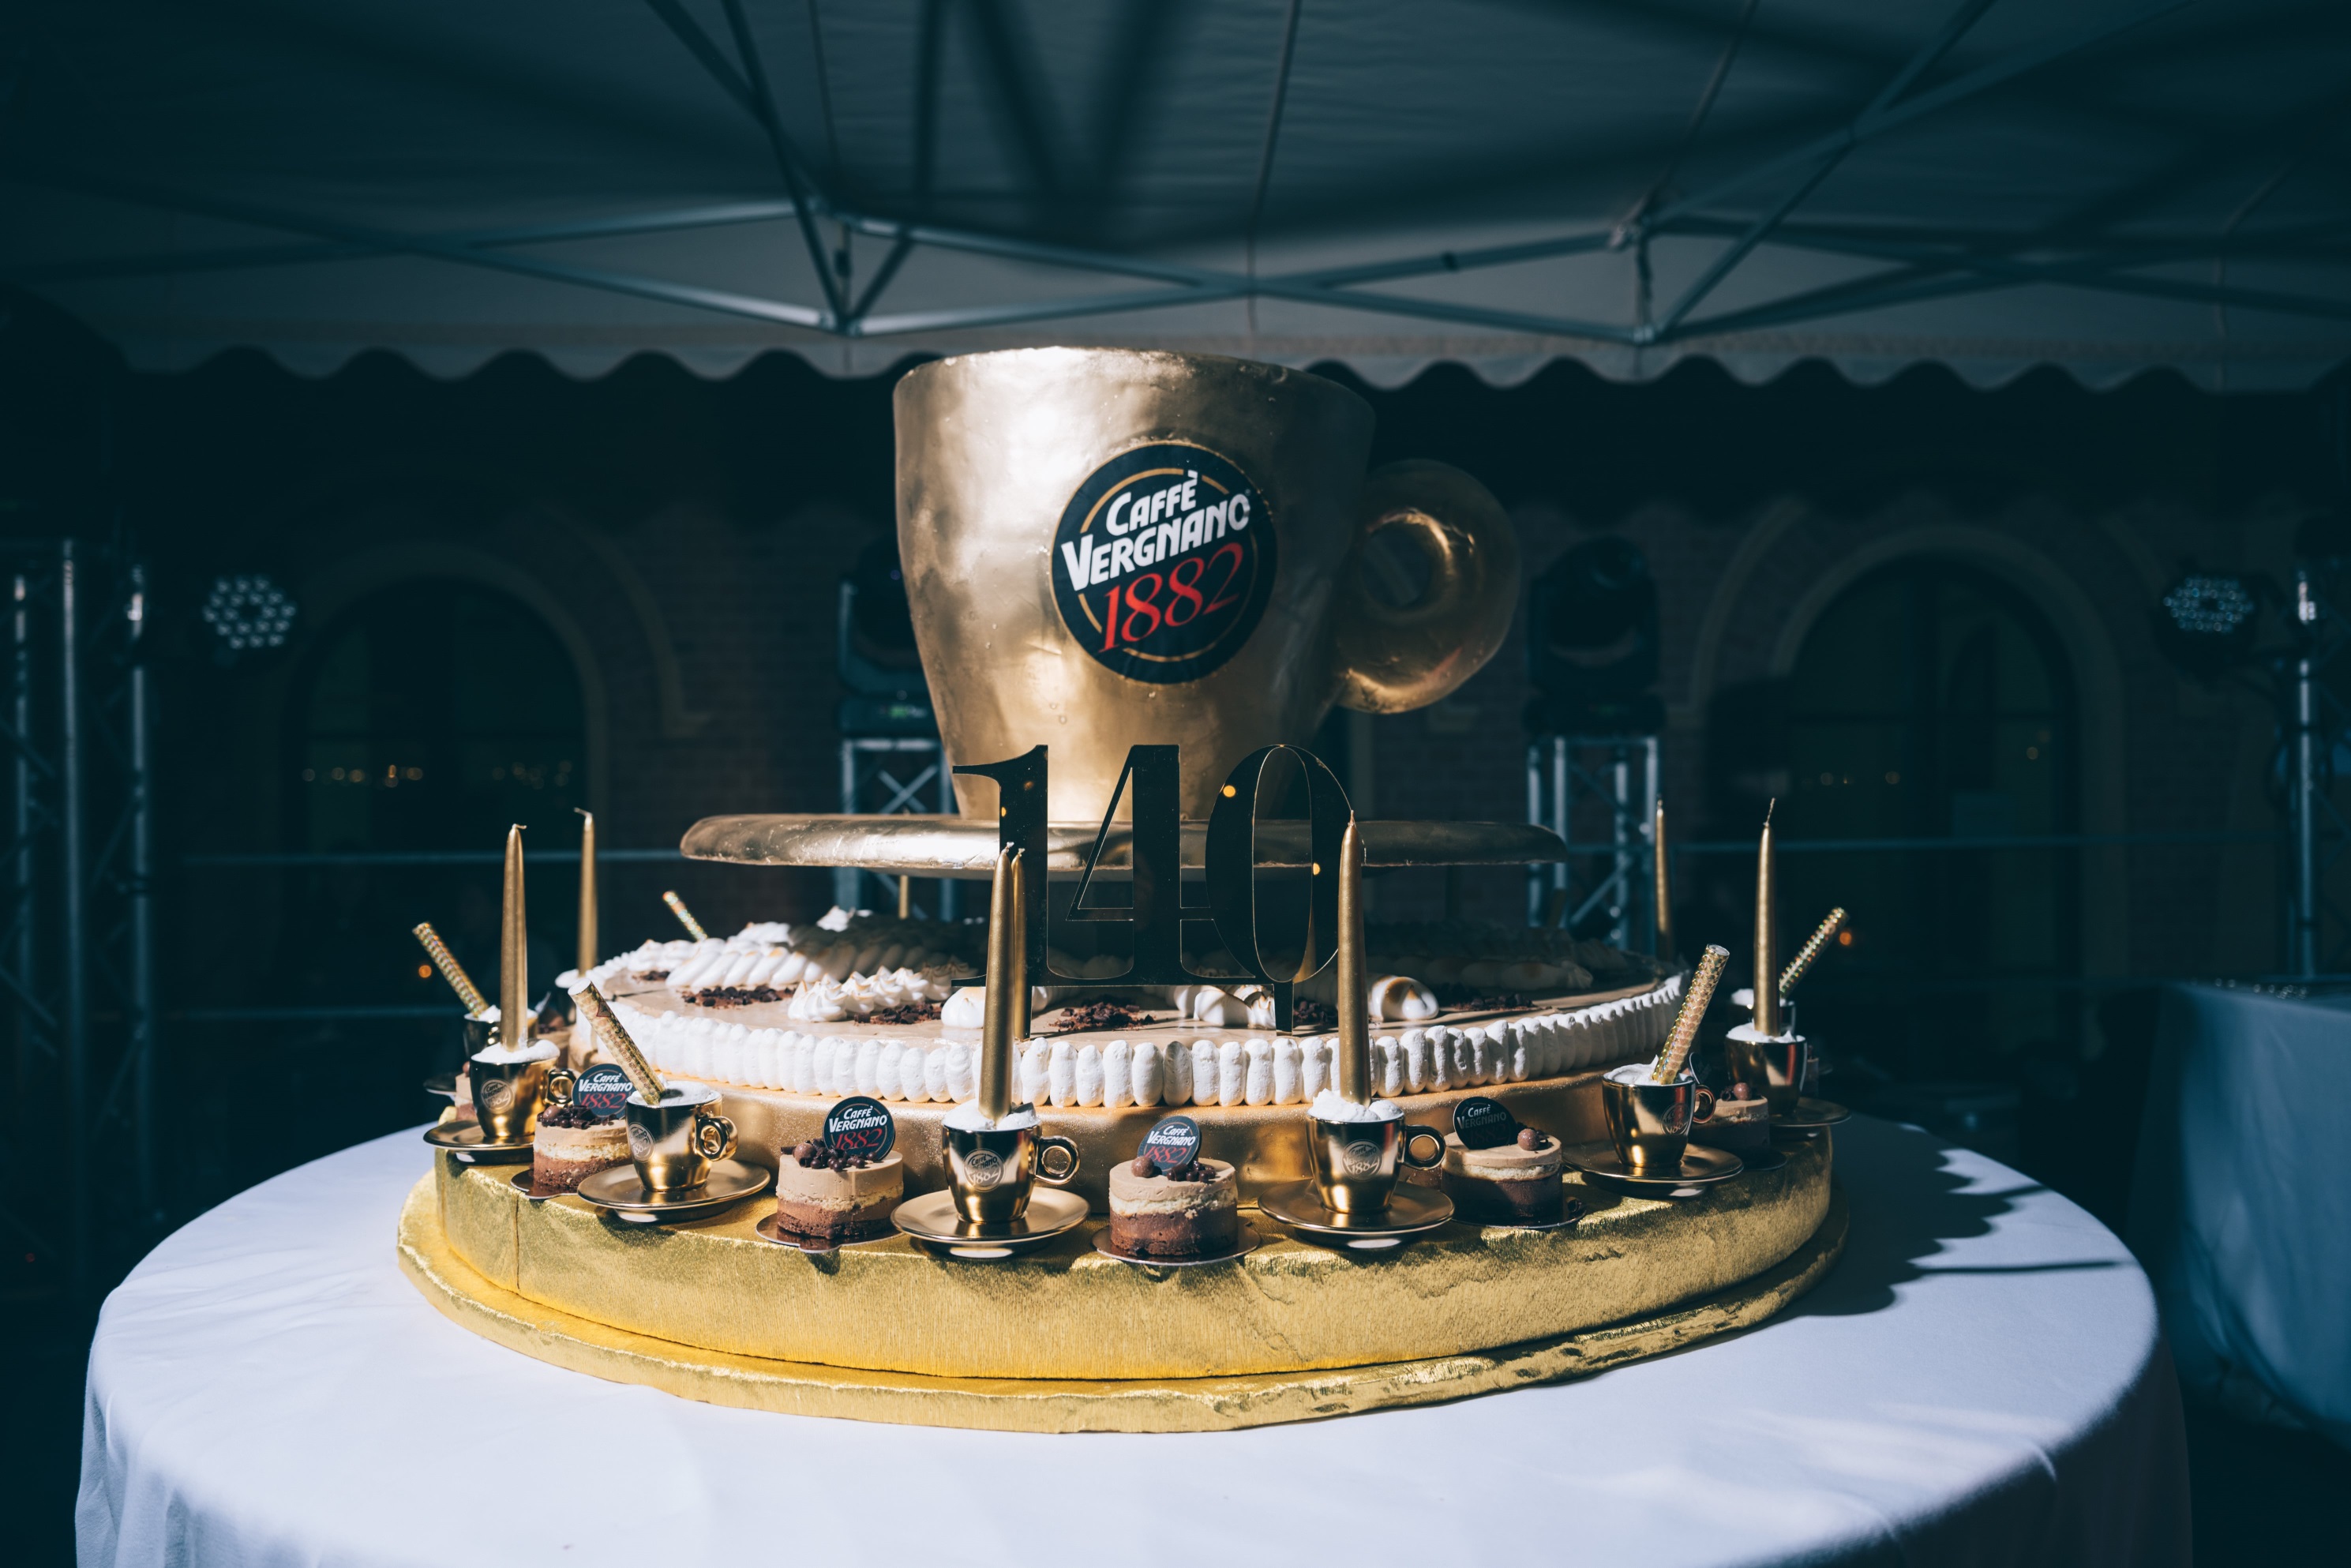 Caffè Vergnano celebrates 140 years of coffee passion, tradition, and love